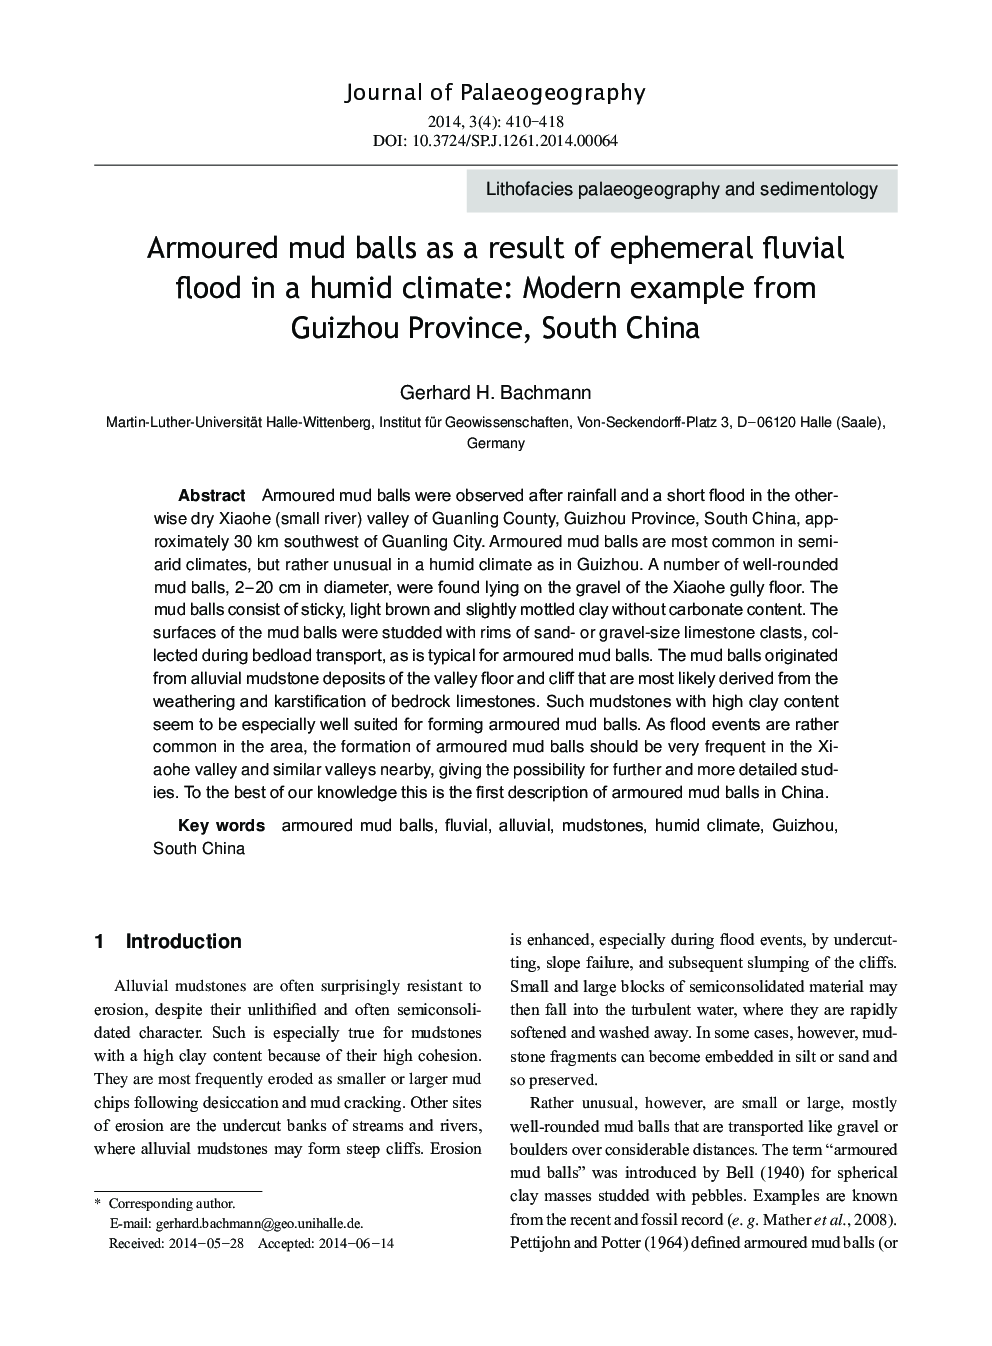 Armoured mud balls as a result of ephemeral fluvial flood in a humid climate: Modern example from Guizhou Province, South China